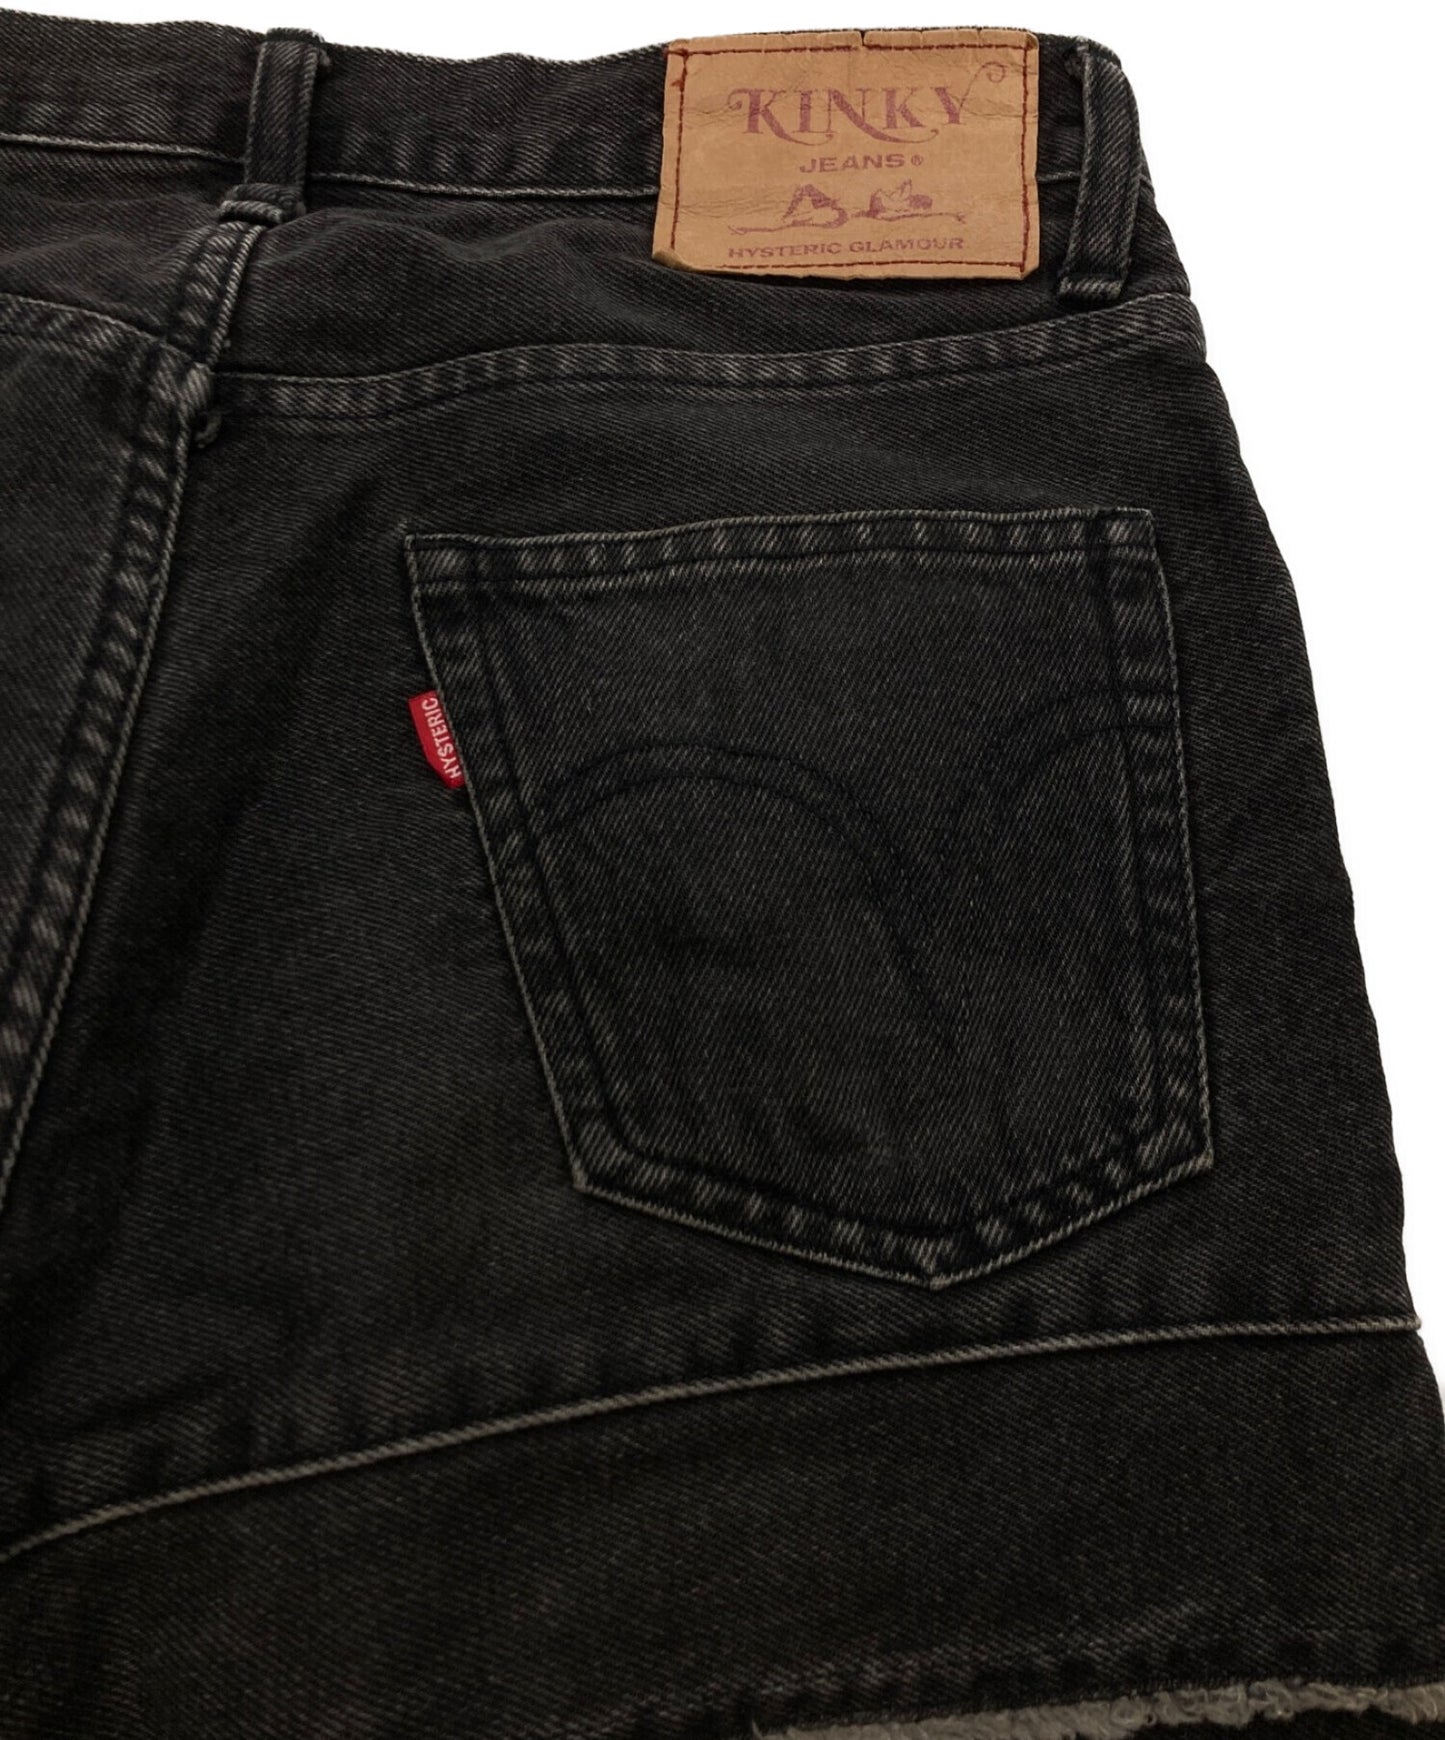 [Pre-owned] Hysteric Glamour Patching Denim Pants 2AP-0663